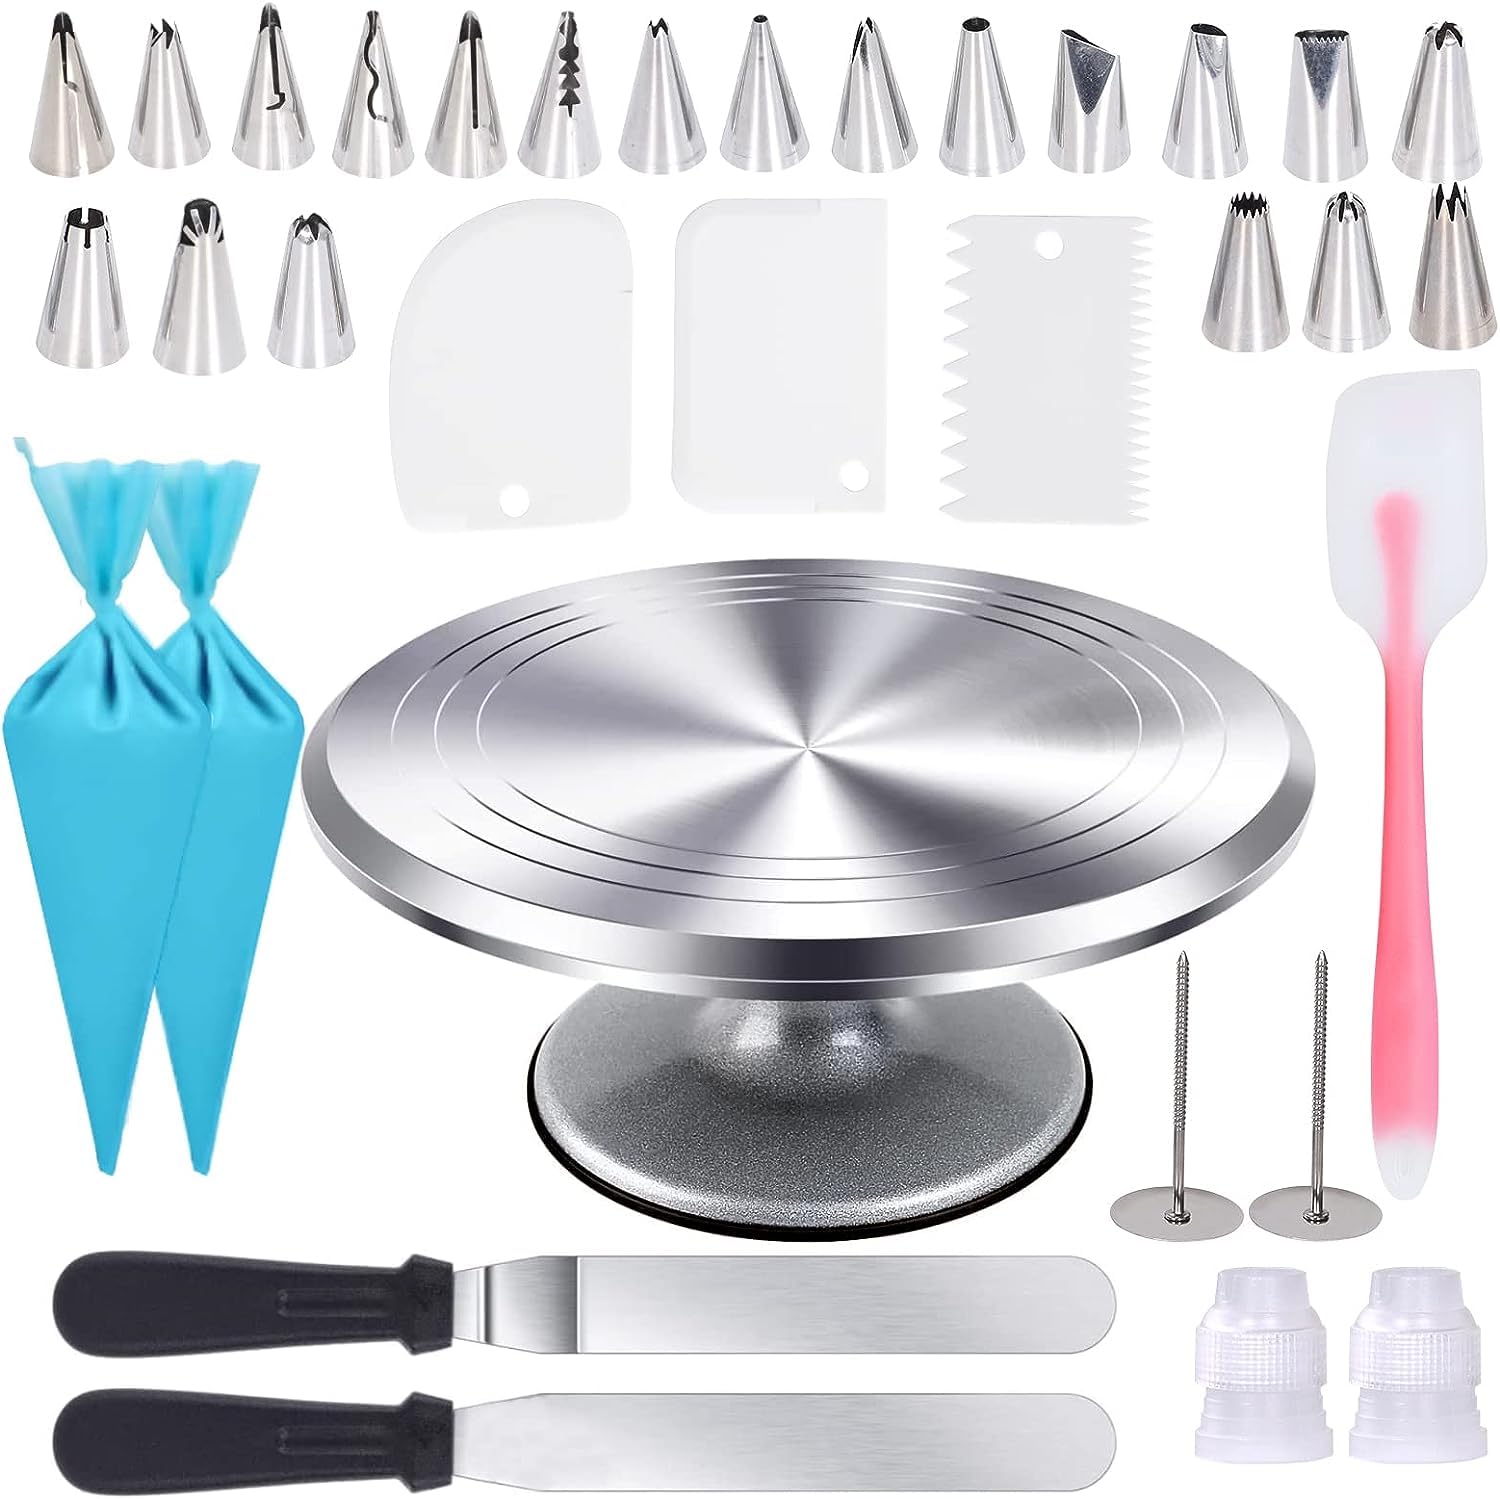 Uten 12 Inch Cake Turntable Cake Decorating Supplies Kit, 33 pcs Rotating Aluminium Cake Stand Set, Baking Tools with 20 Icing Tips, Bags, 3 Icing Smoother, Straight & Offset Spatula, Silicone Spatula